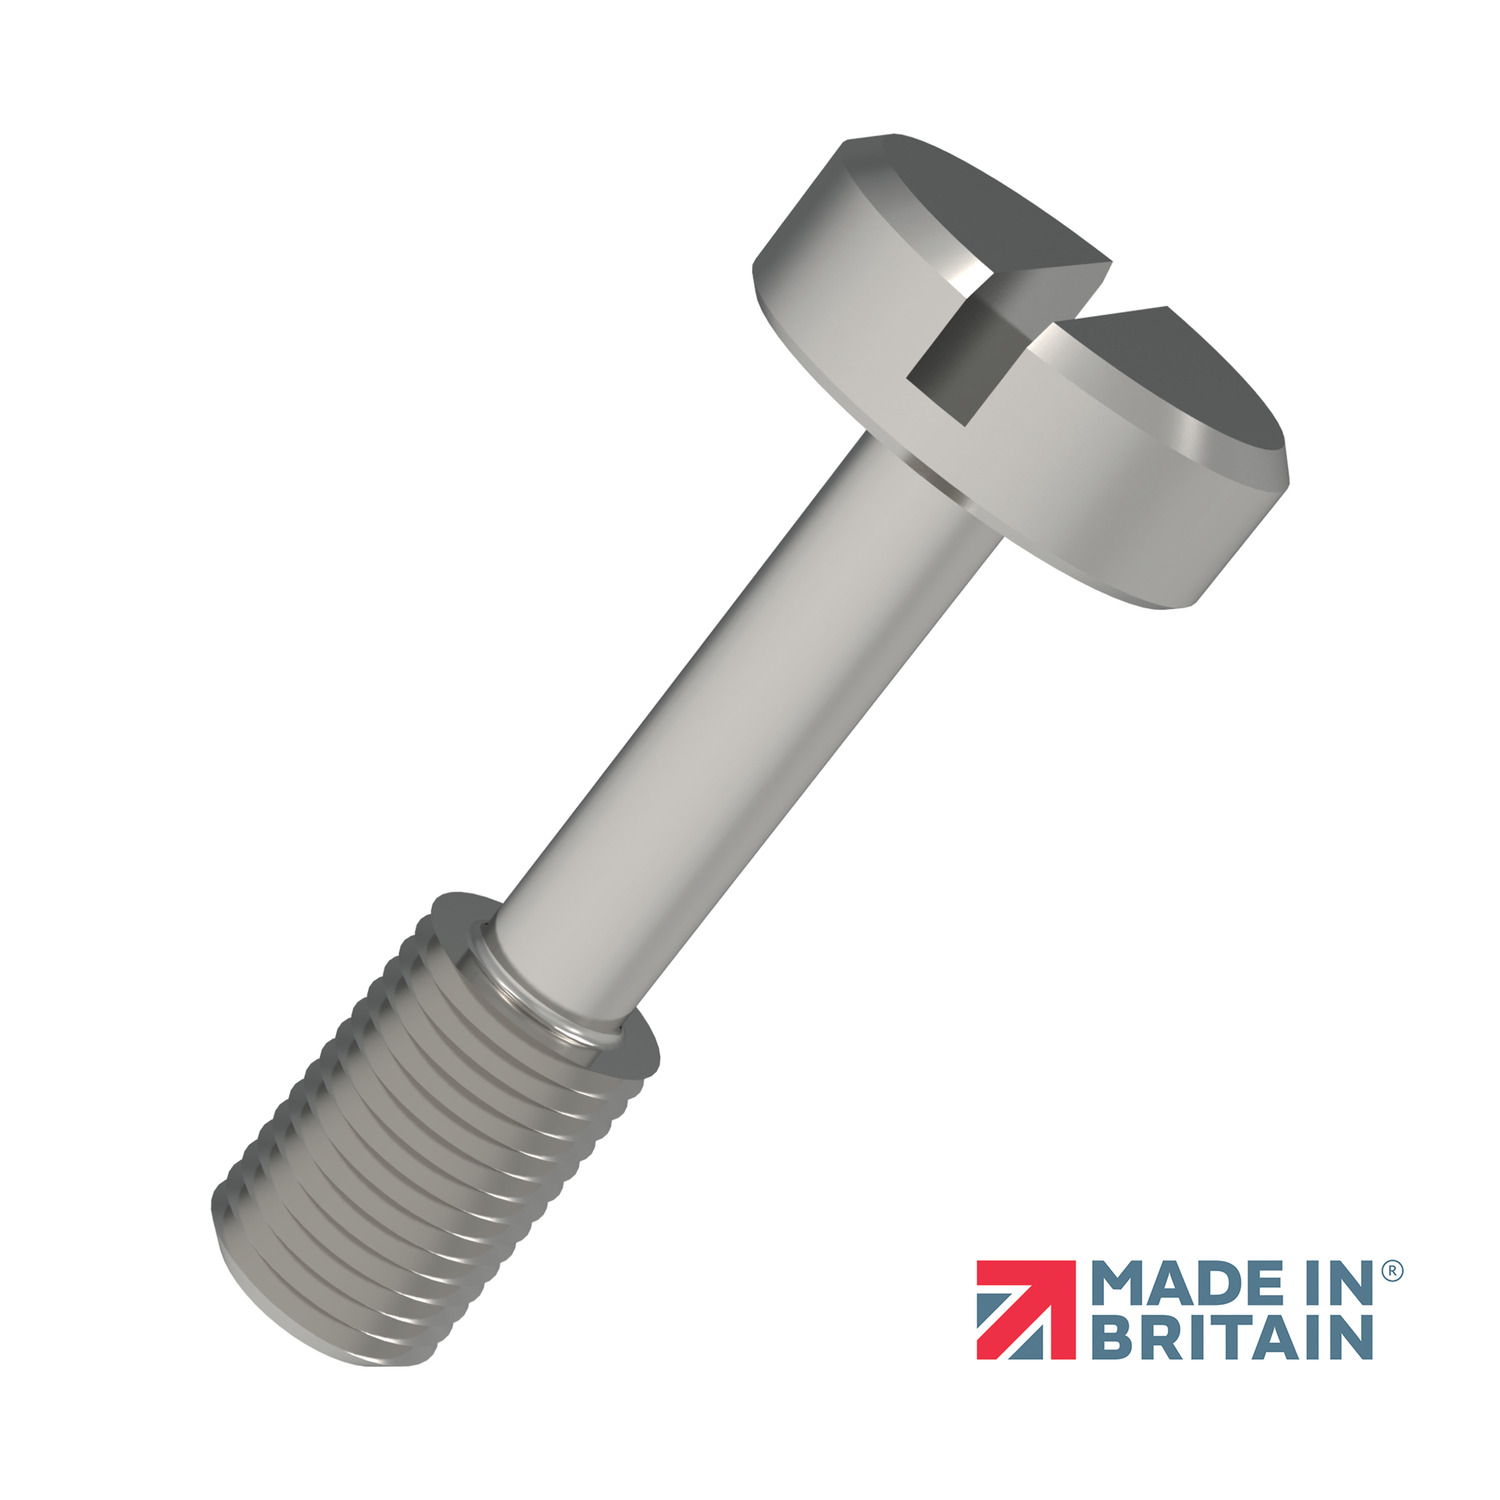 Product P0155.A2, Captive Screws - Cheese Head slot drive - 303 stainless / 